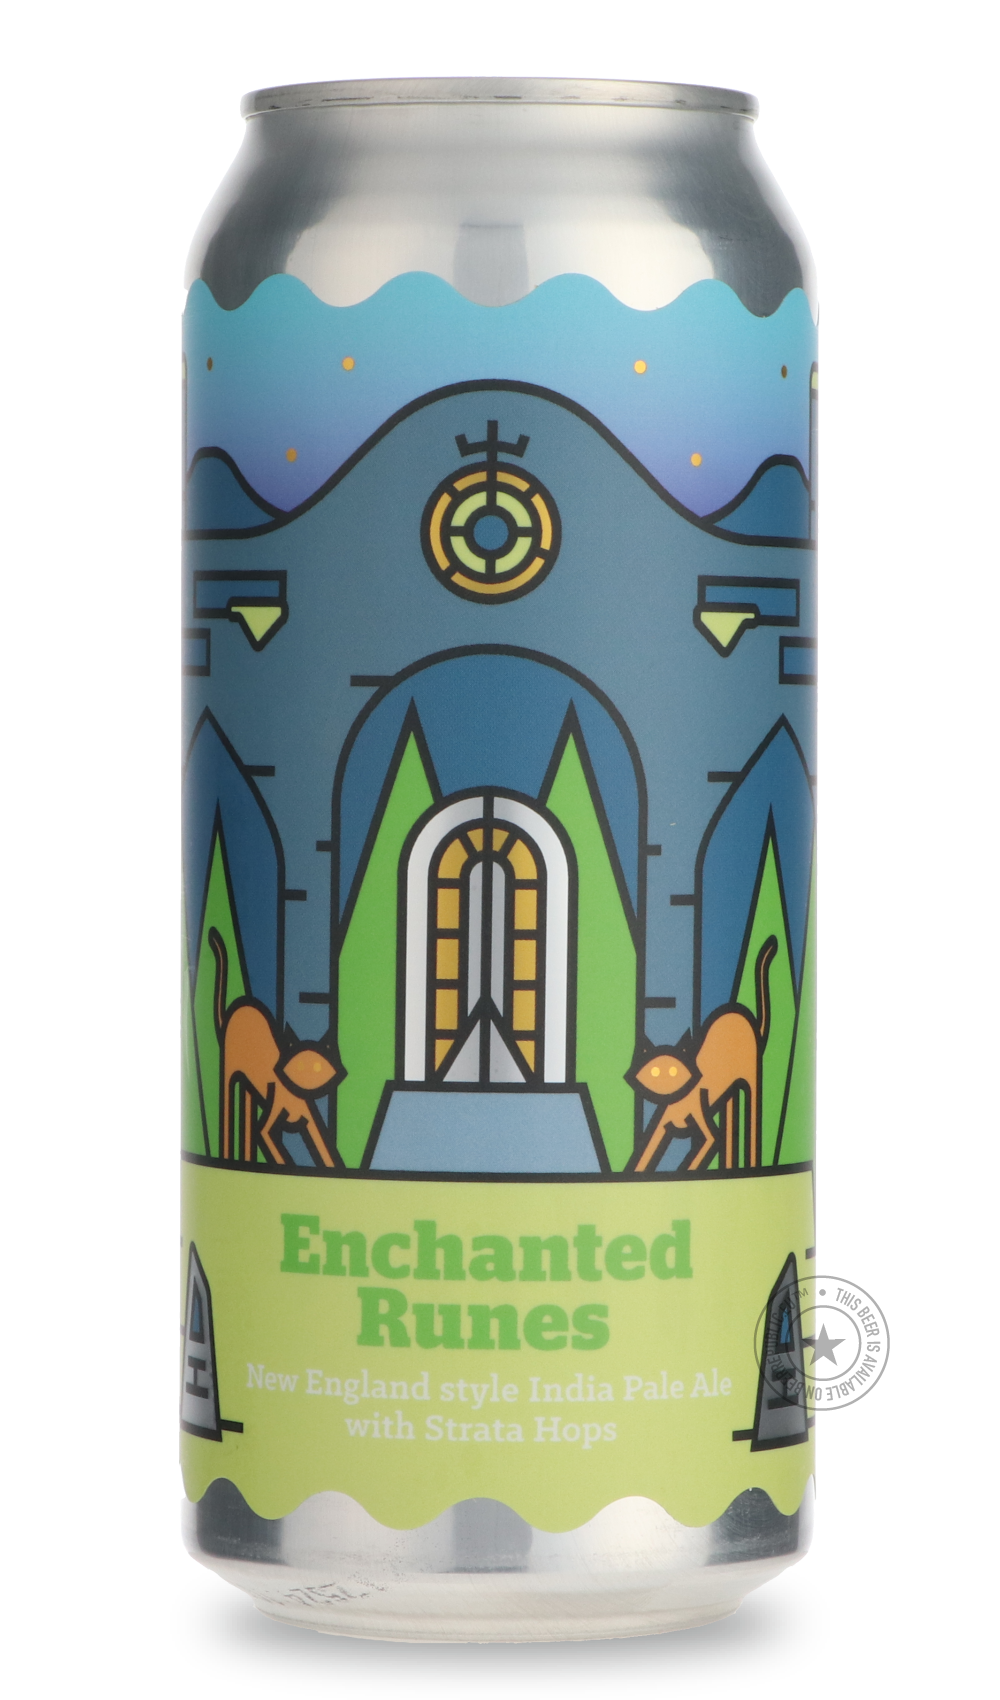 -Burlington- Enchanted Runes-IPA- Only @ Beer Republic - The best online beer store for American & Canadian craft beer - Buy beer online from the USA and Canada - Bier online kopen - Amerikaans bier kopen - Craft beer store - Craft beer kopen - Amerikanisch bier kaufen - Bier online kaufen - Acheter biere online - IPA - Stout - Porter - New England IPA - Hazy IPA - Imperial Stout - Barrel Aged - Barrel Aged Imperial Stout - Brown - Dark beer - Blond - Blonde - Pilsner - Lager - Wheat - Weizen - Amber - Barl